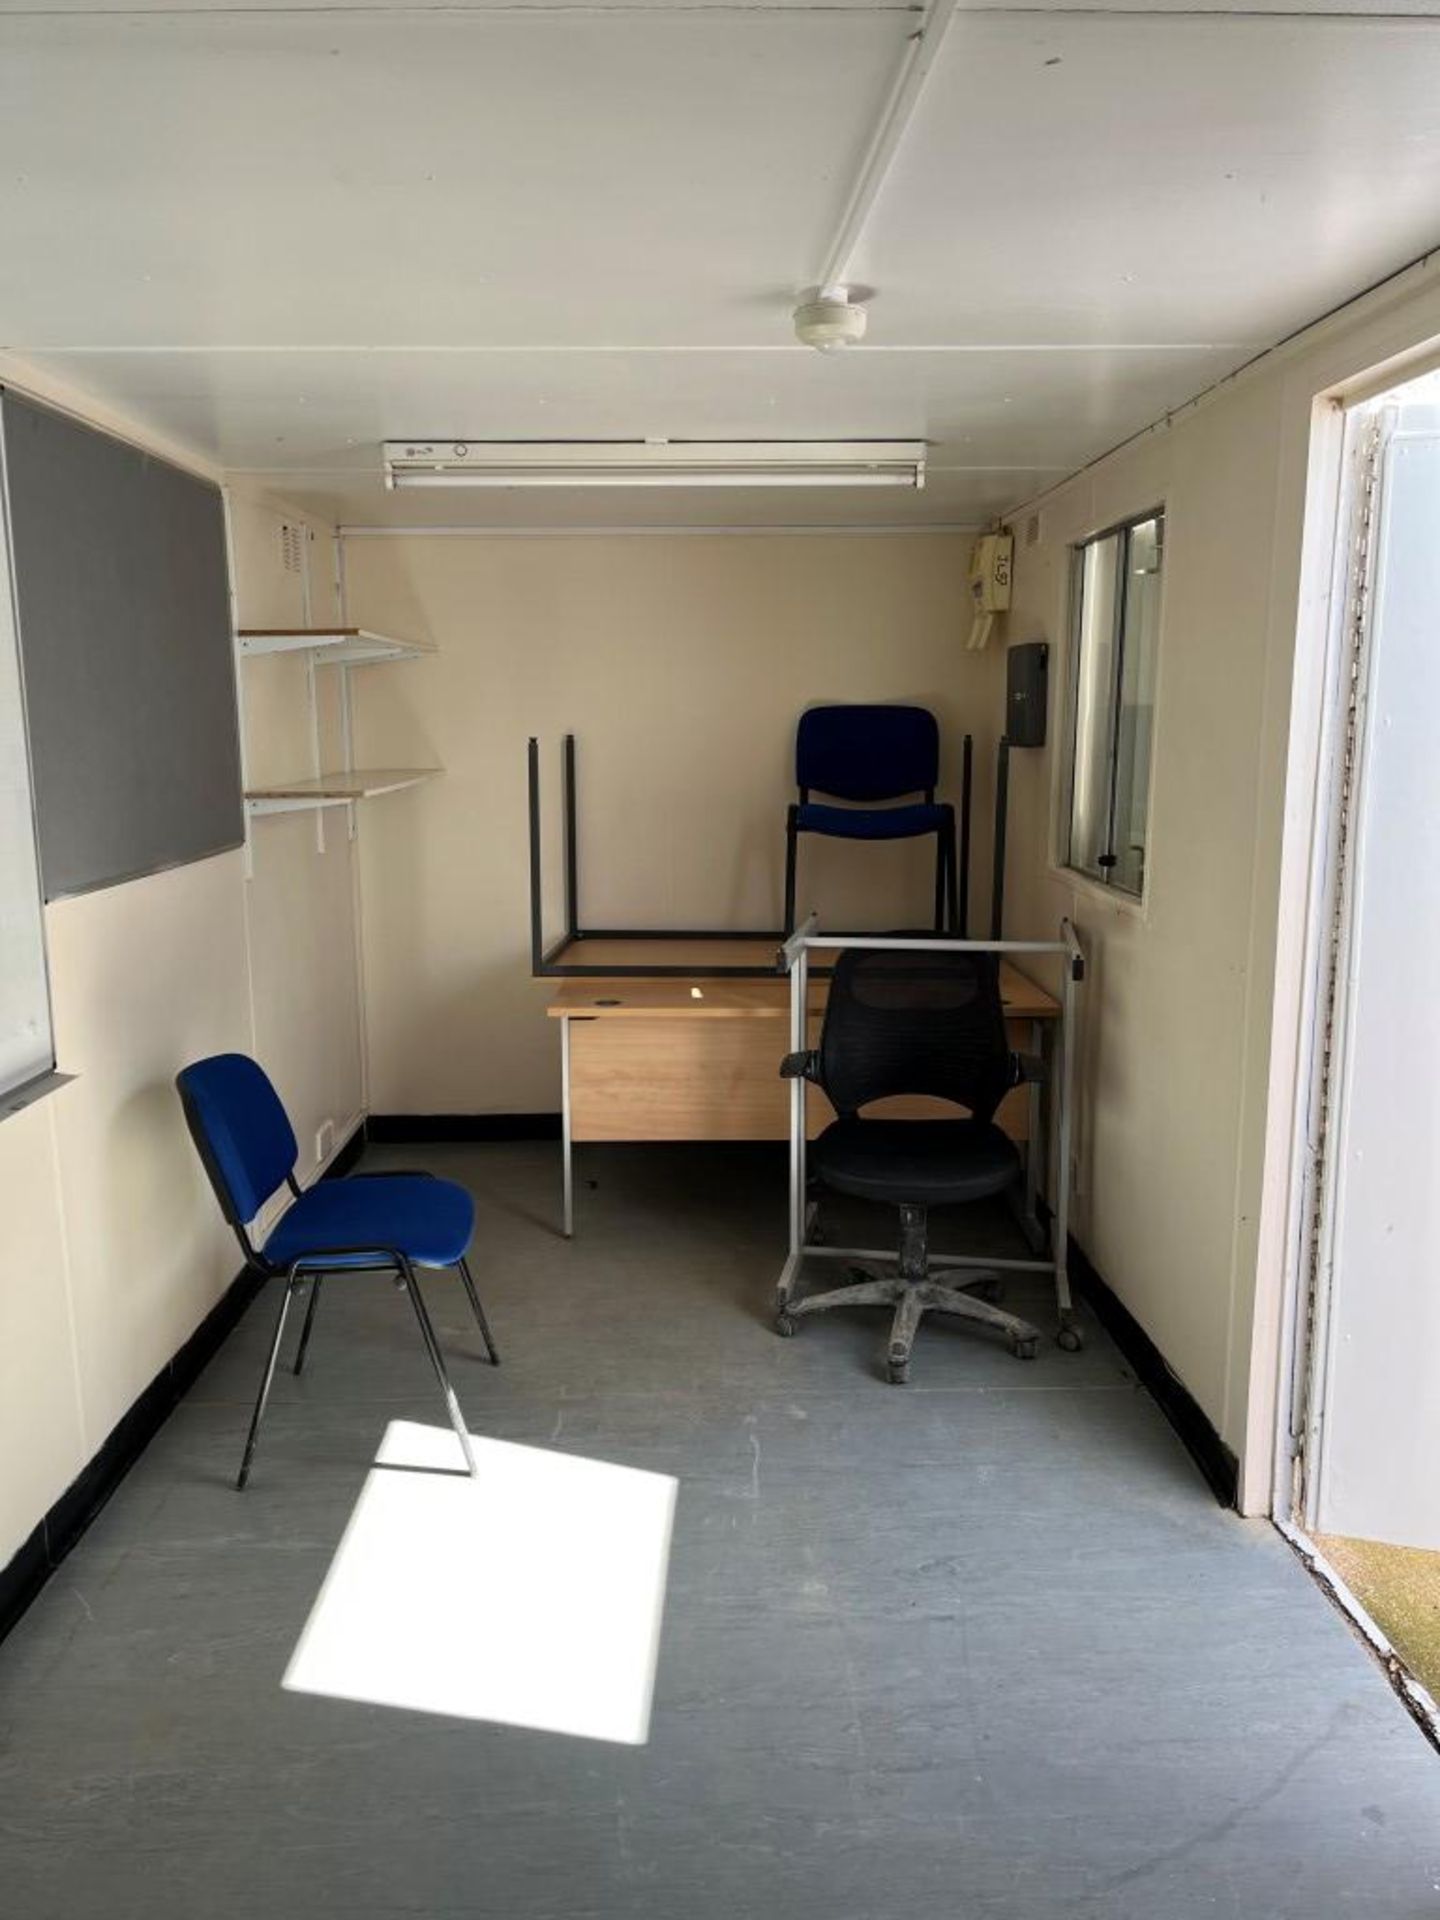 1, Approx 20ft x 8ft x 8ft Containerised Jack Legged Site Office with - Image 5 of 5